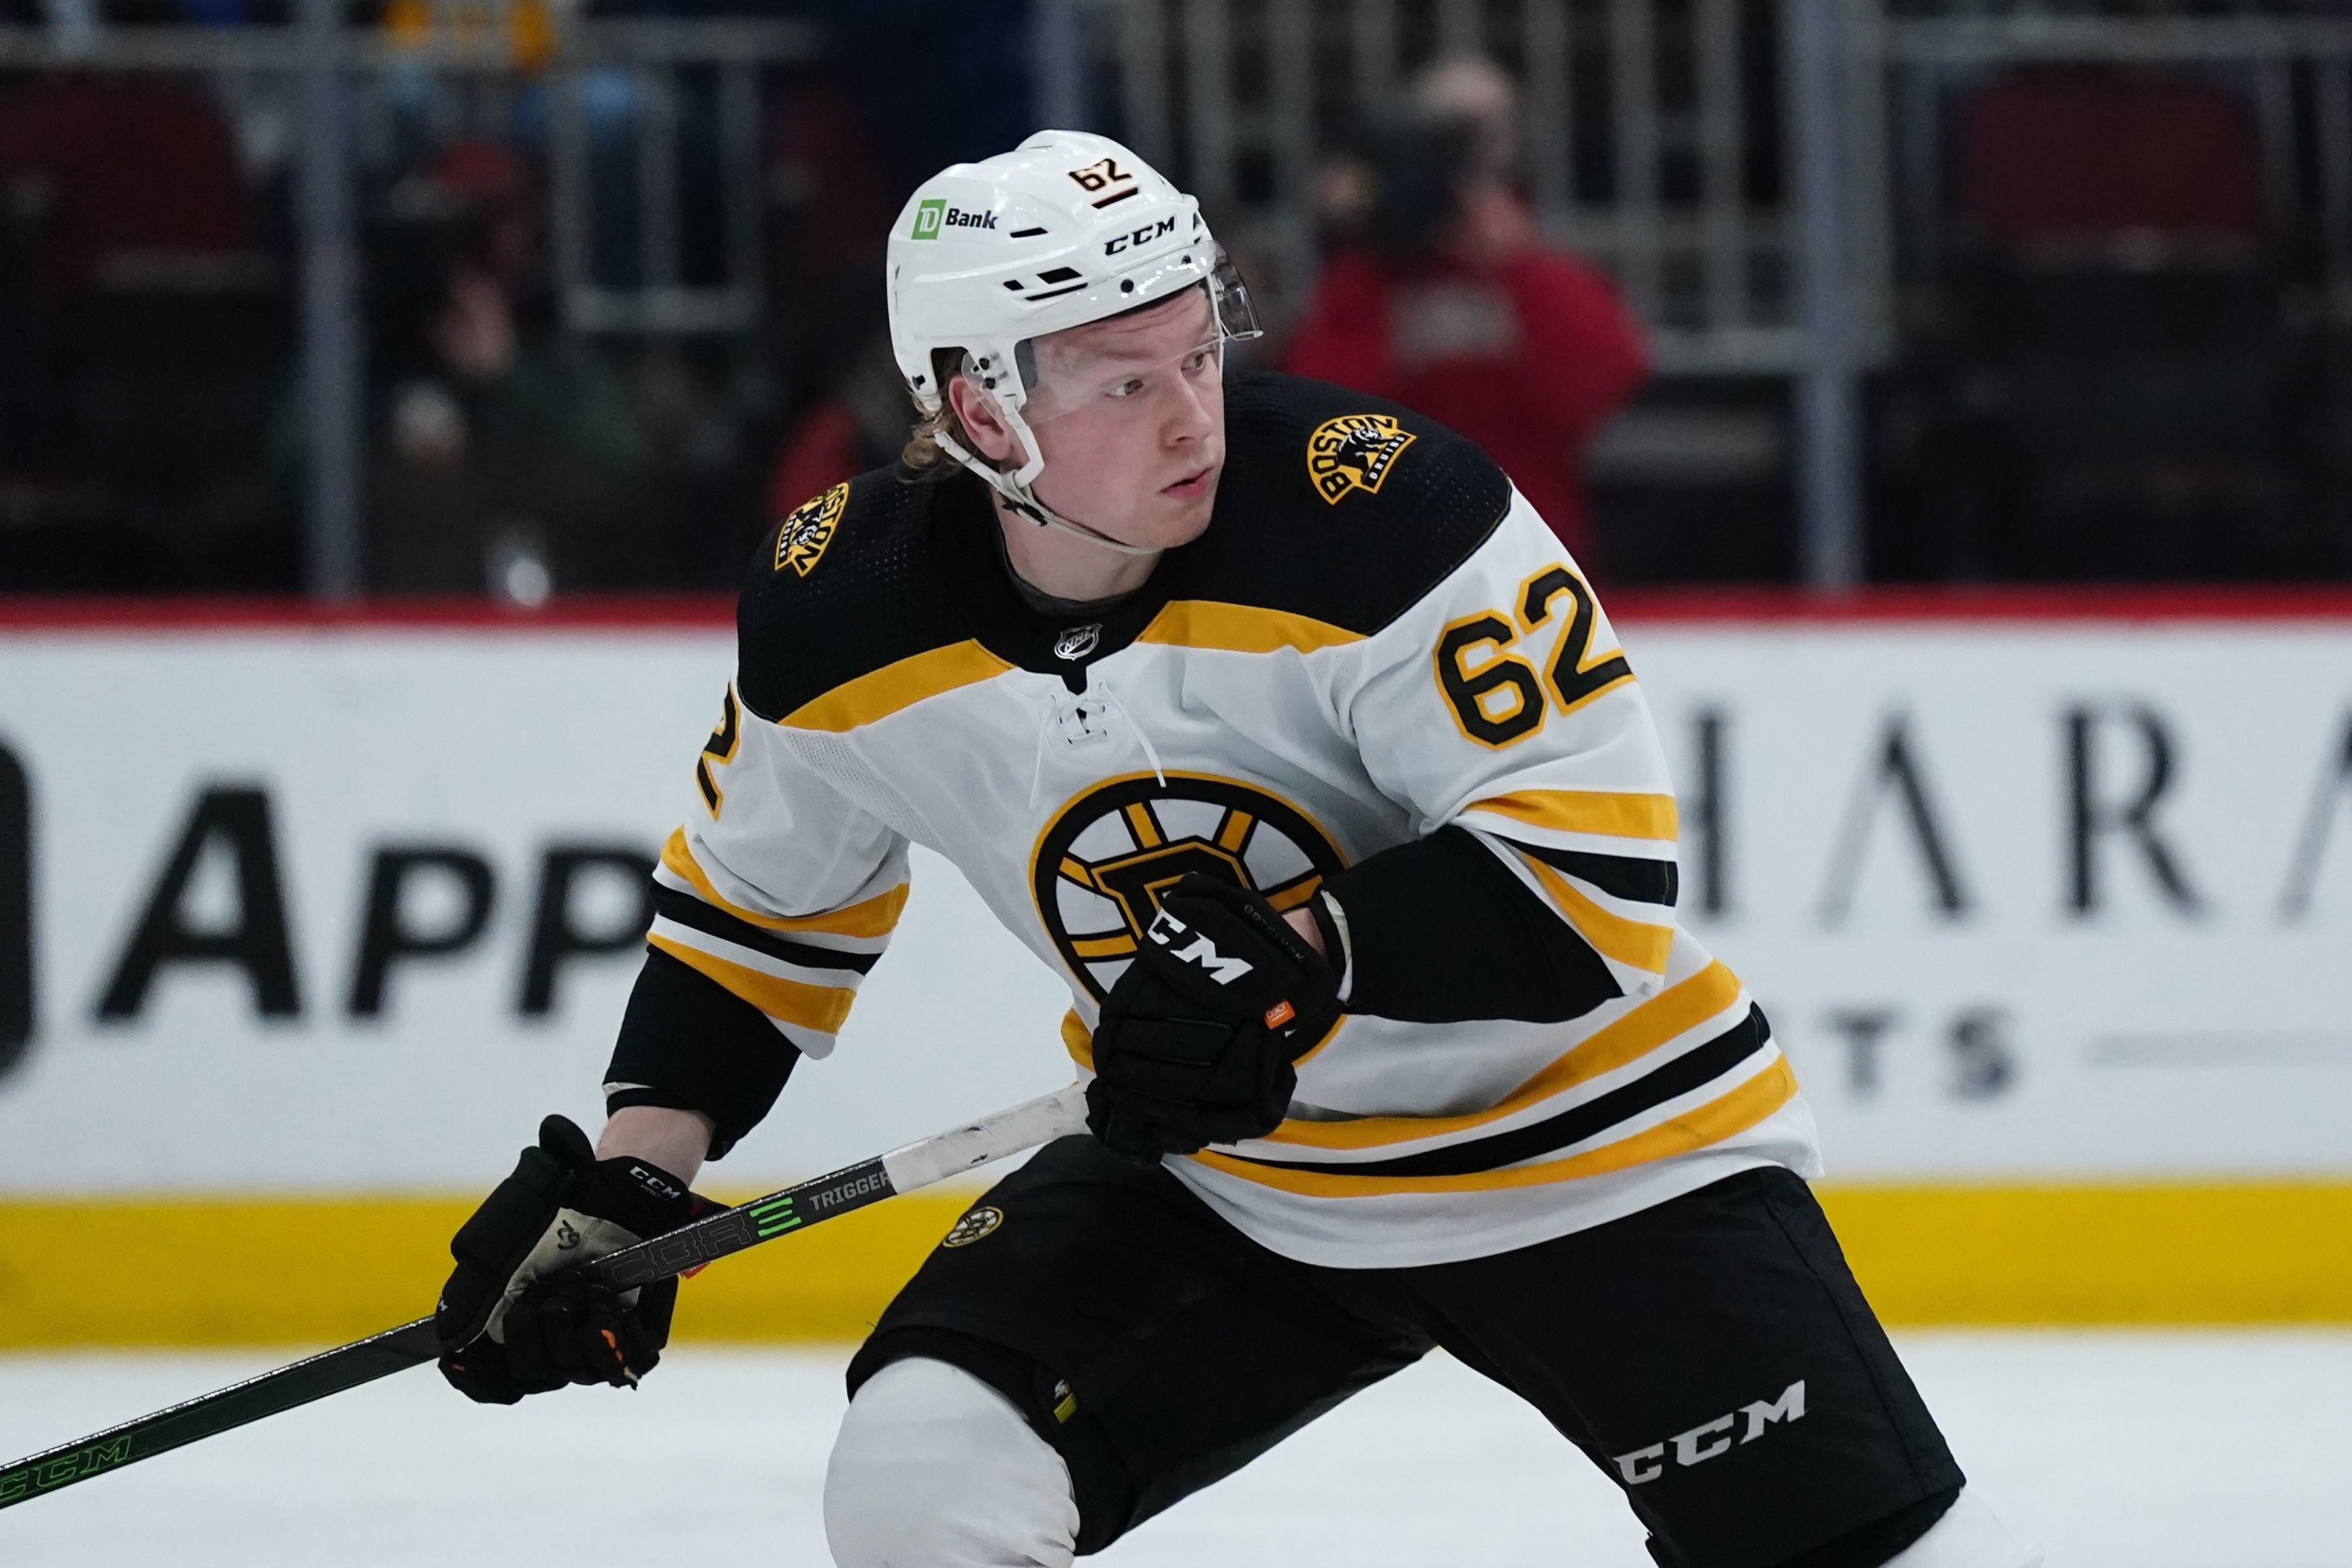 Oskar Steen hopes for more than just cameos with the Bruins this season